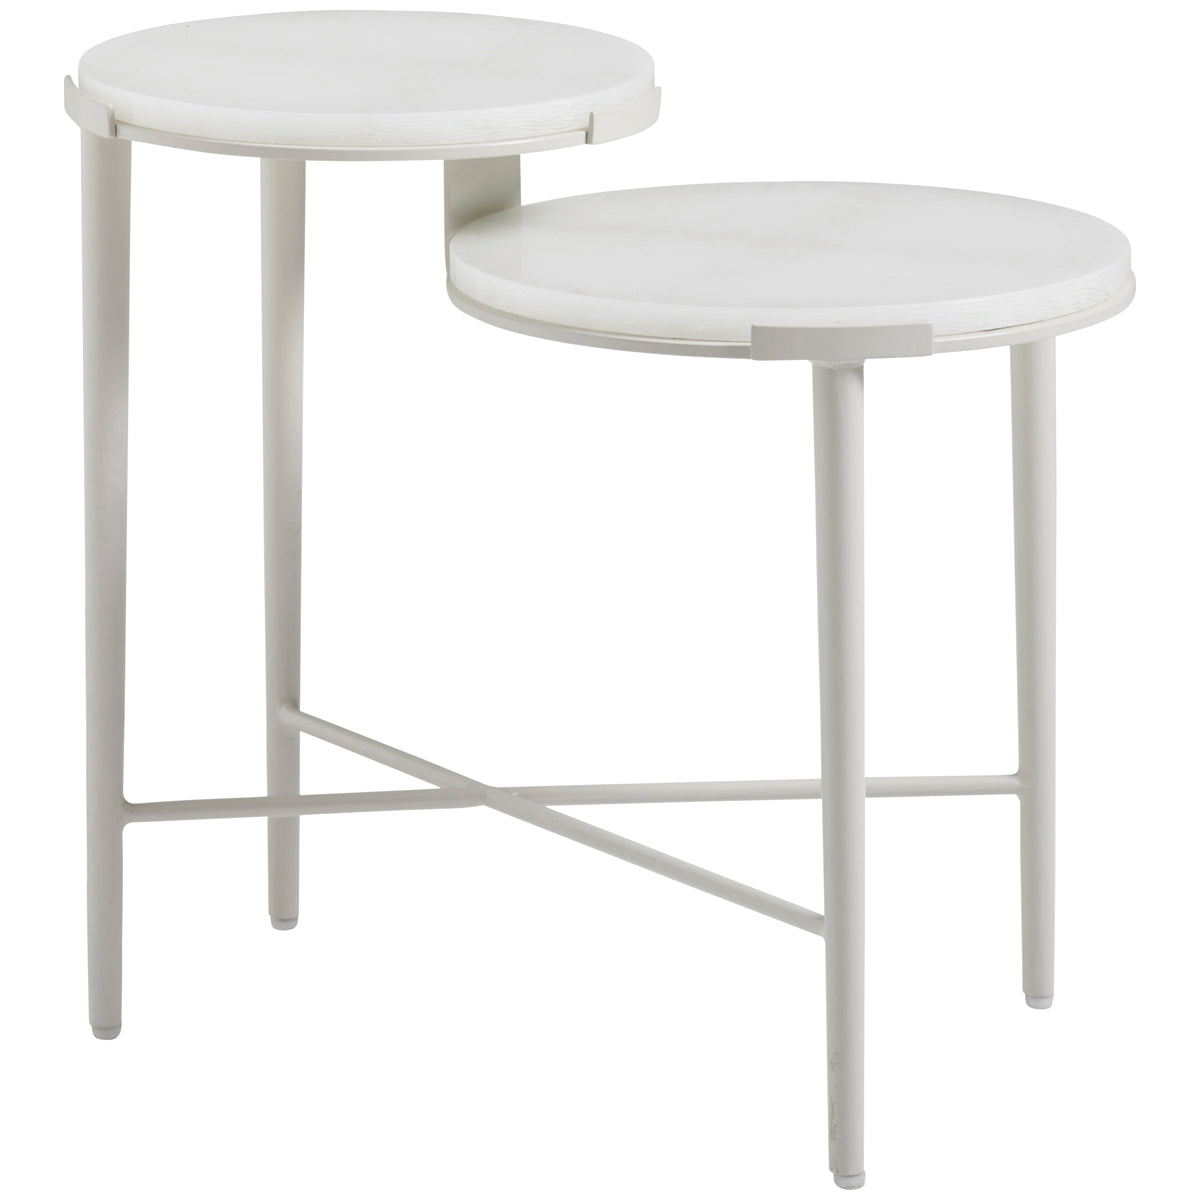 Tommy Bahama Seabrook Outdoor Tiered End Table